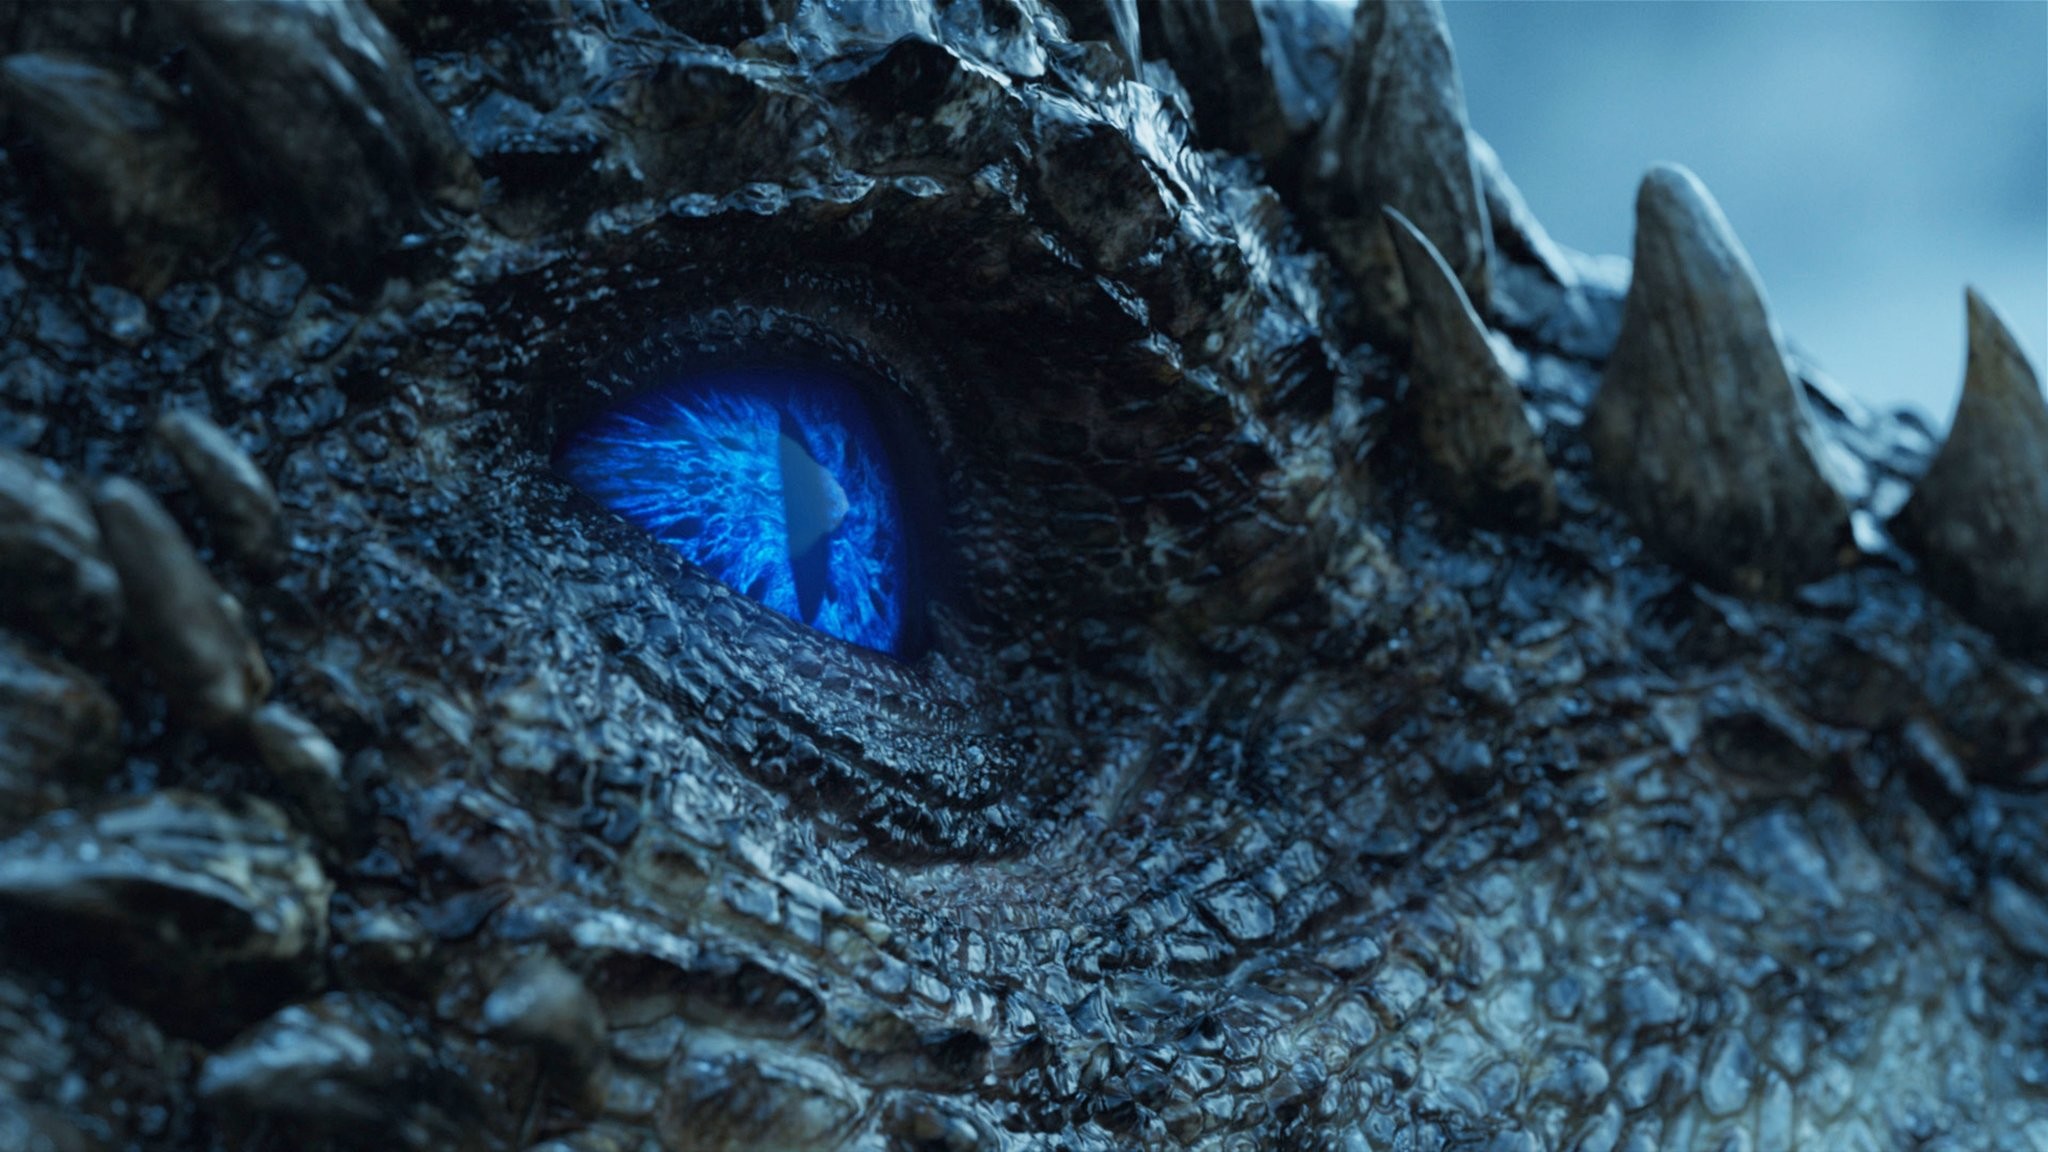 So, Is Viserion a Wight or a White Walker